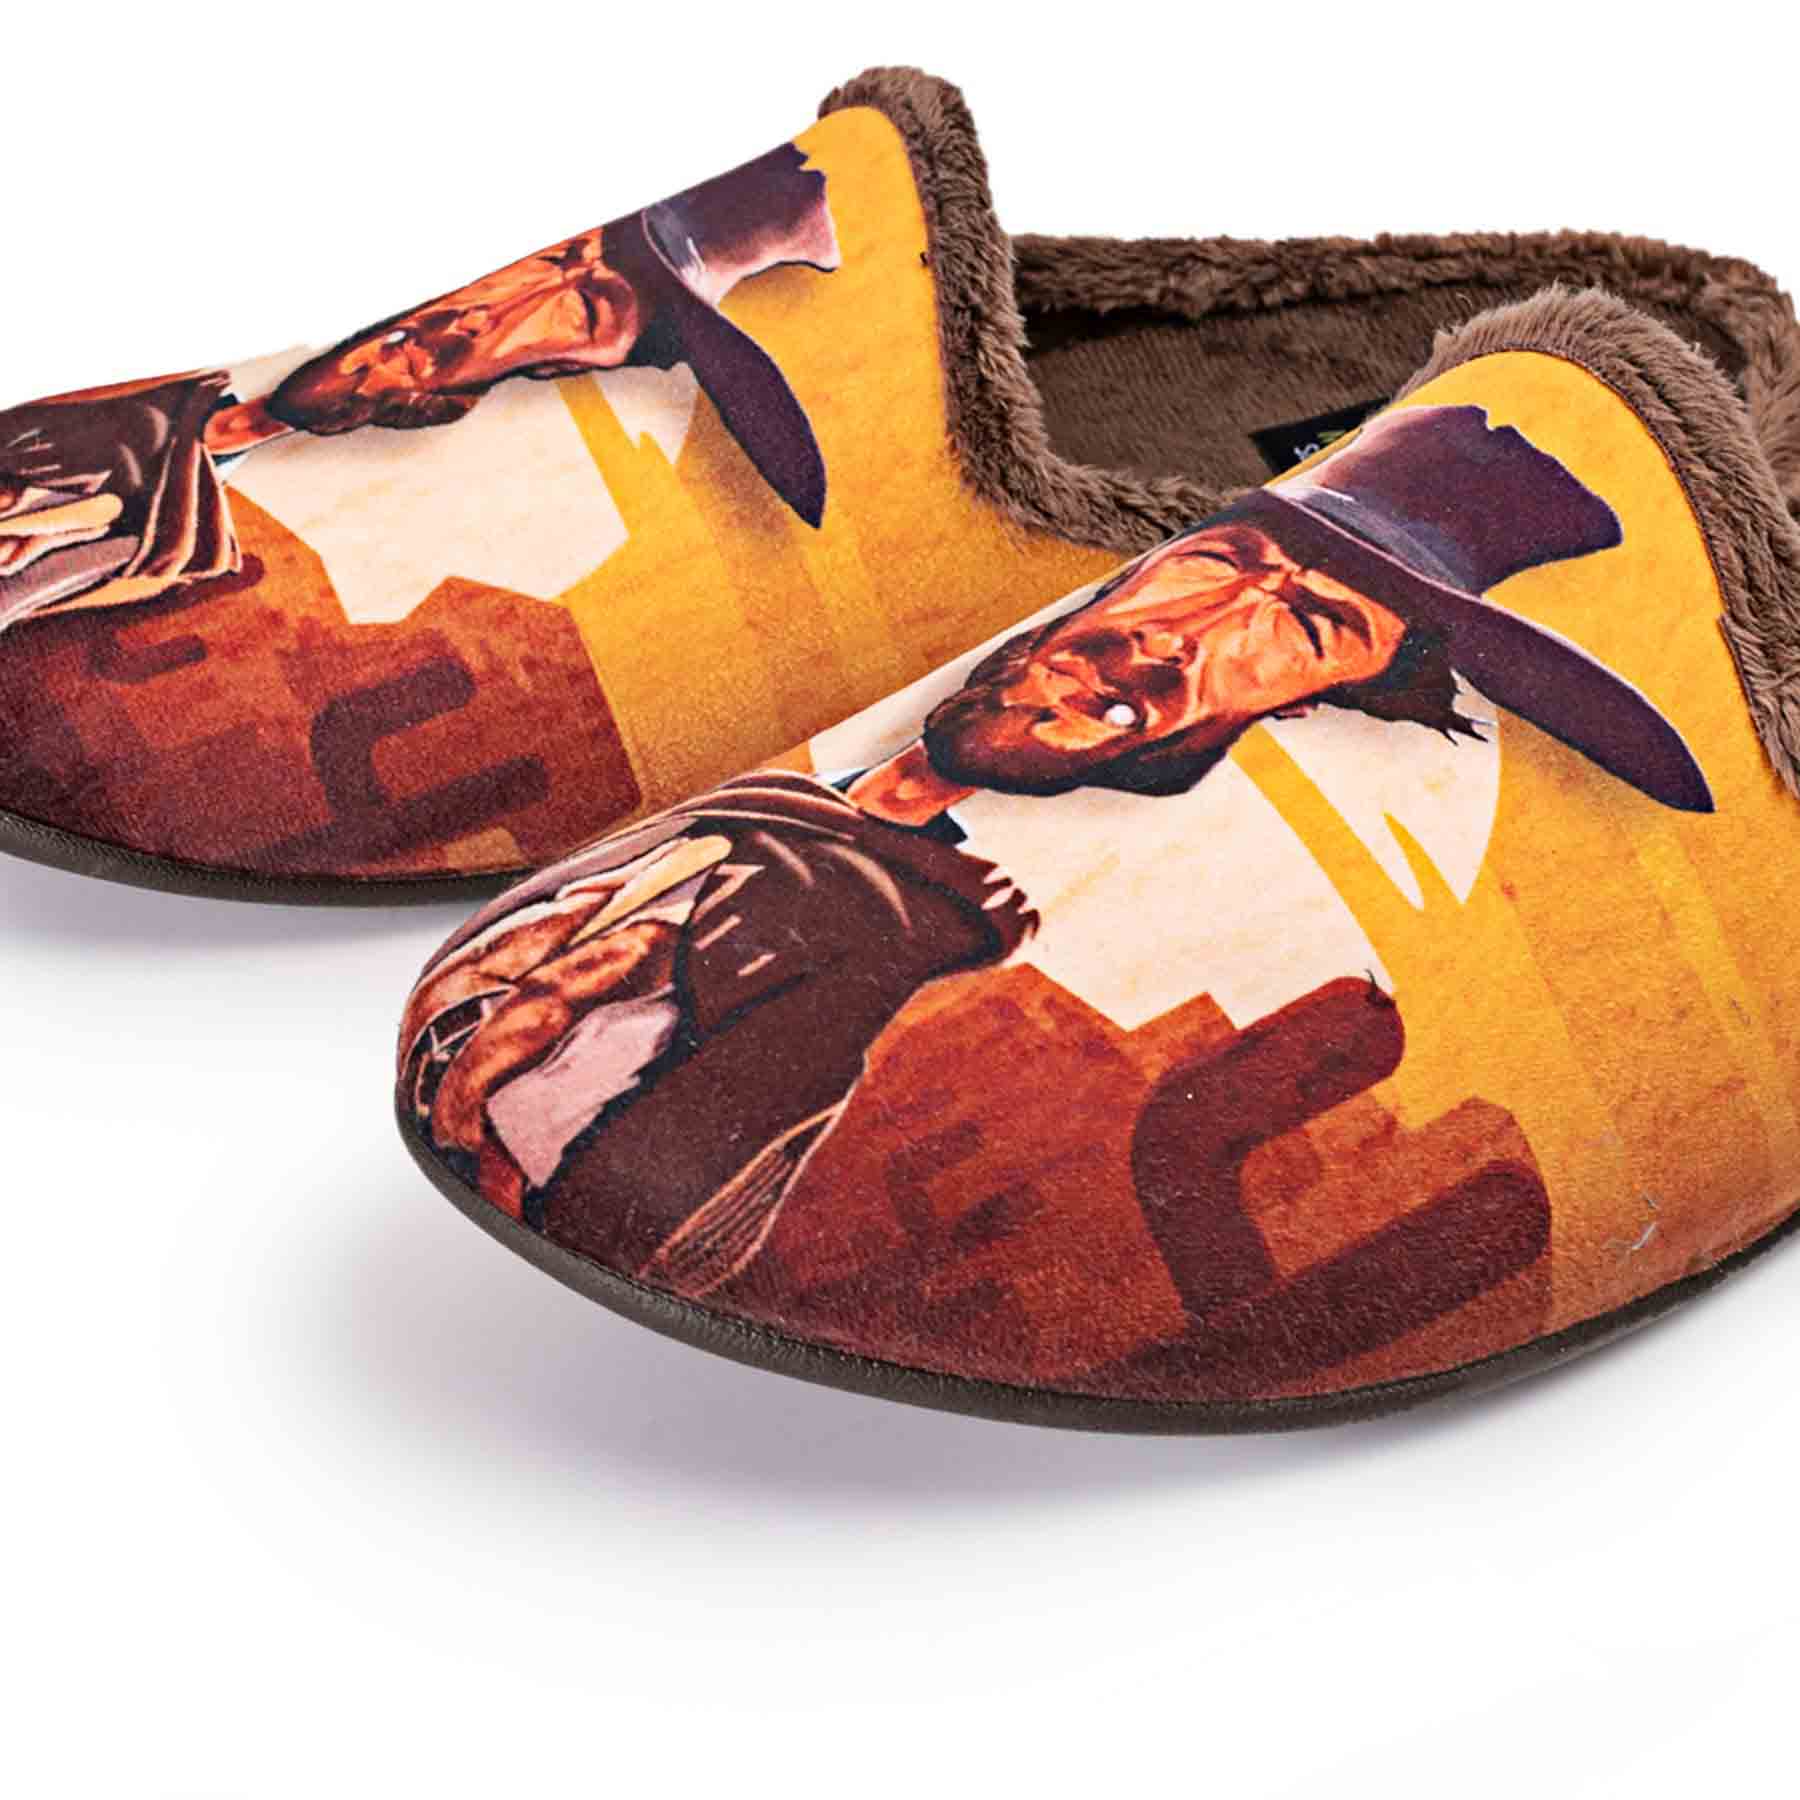 Marpen Slippers uomo Clint Eastwood